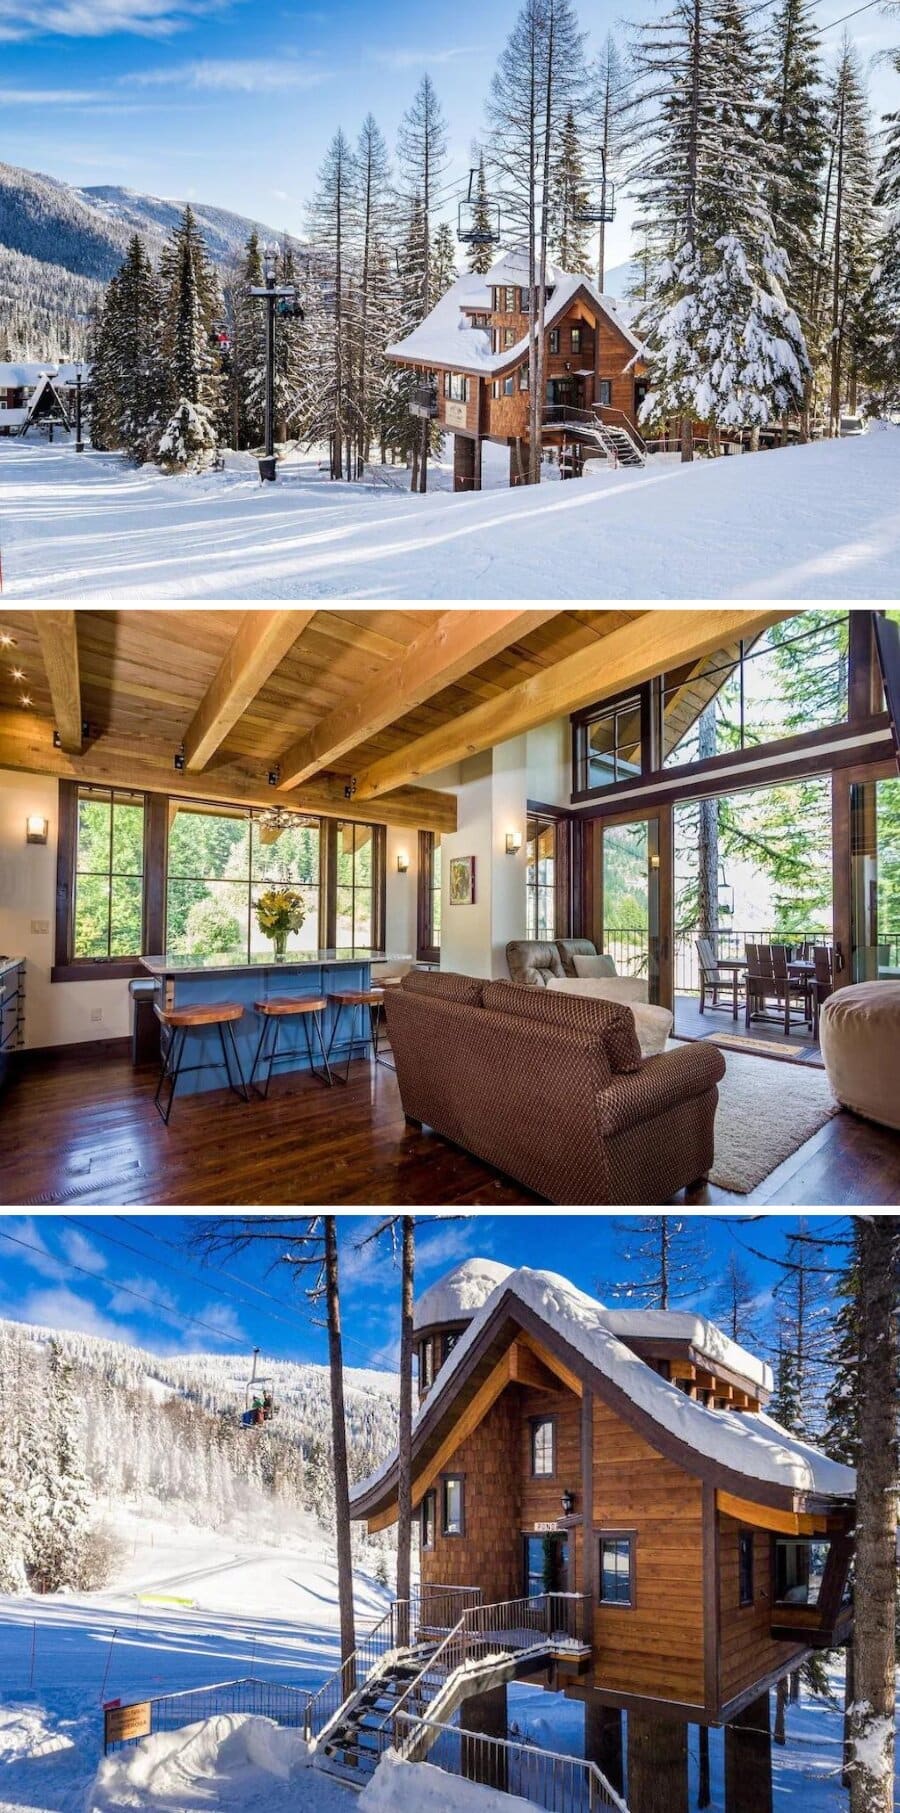 Interior and exterior images of this ski-in ski-out house in Montana